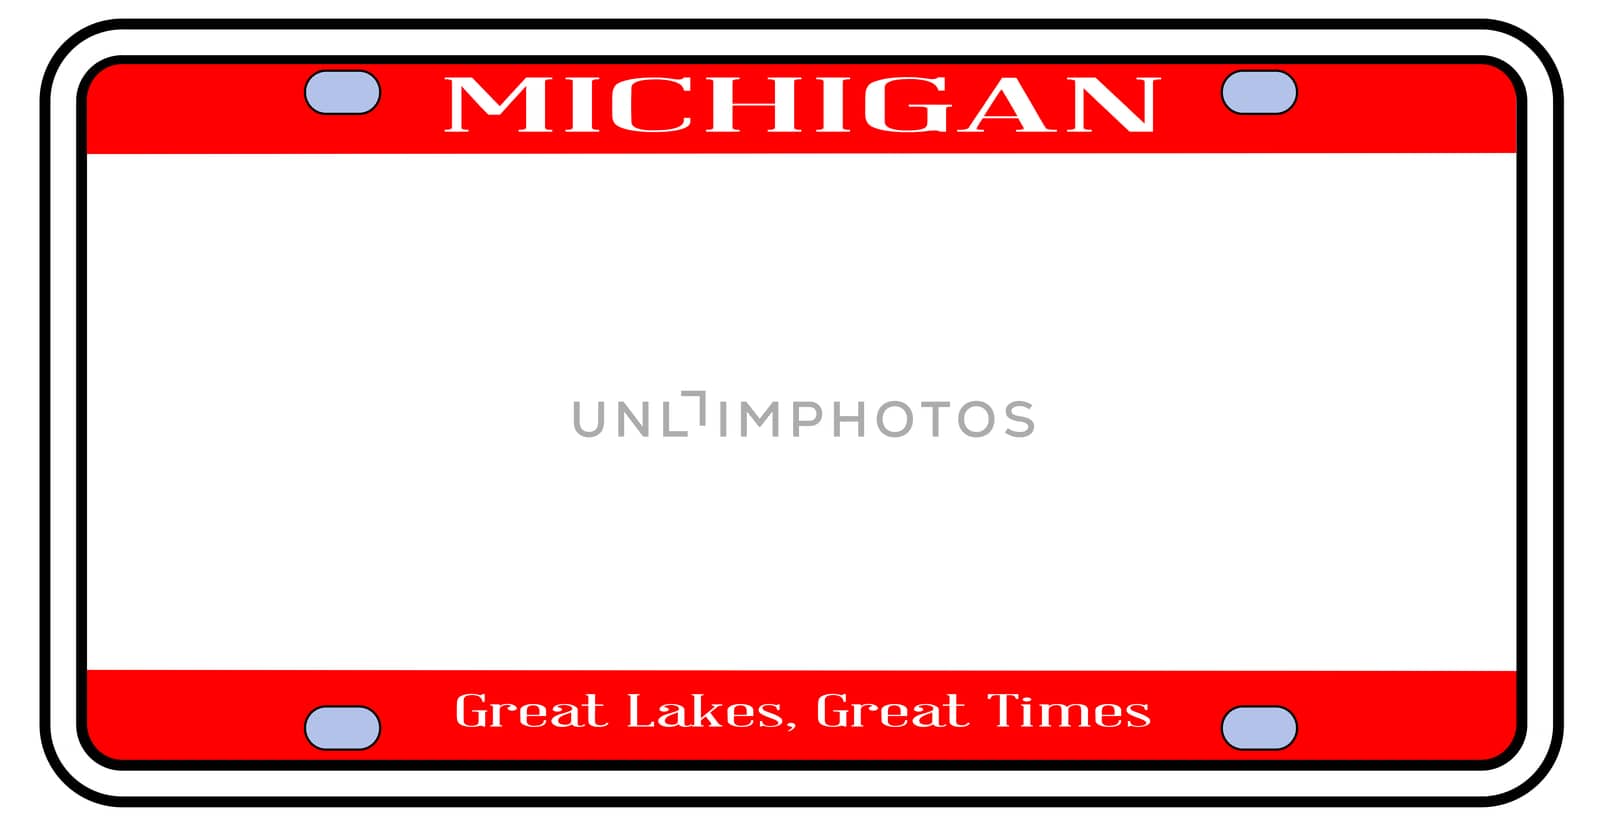 Michigan state license plate in the colors of the state flag over a white background